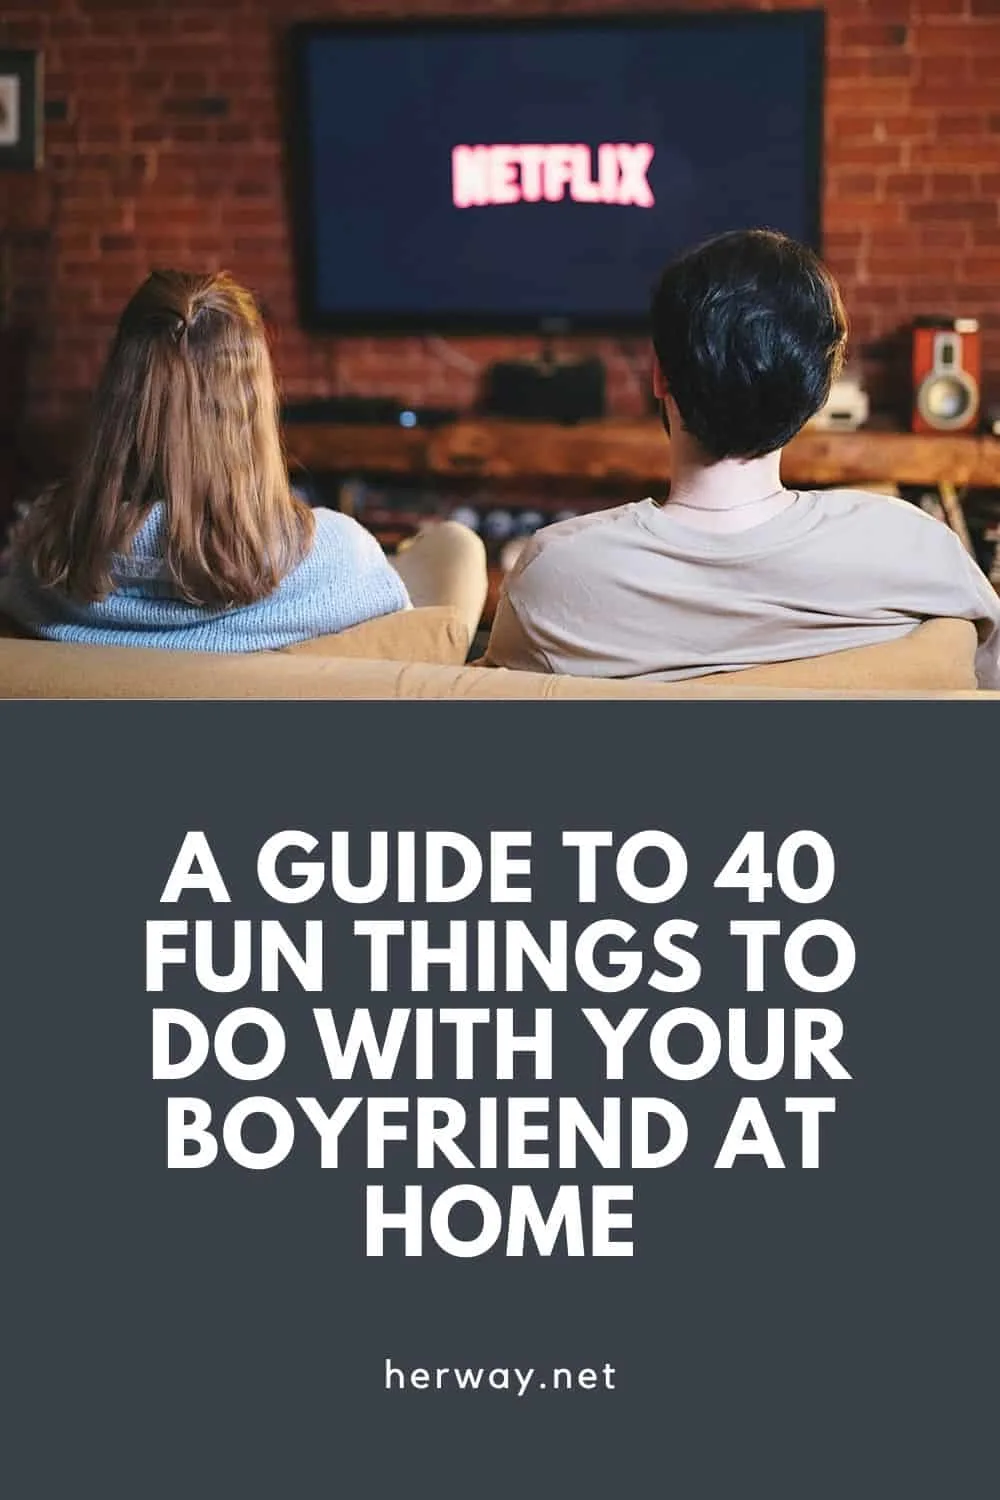 A Guide To 40 Fun Things To Do With Your Boyfriend At Home